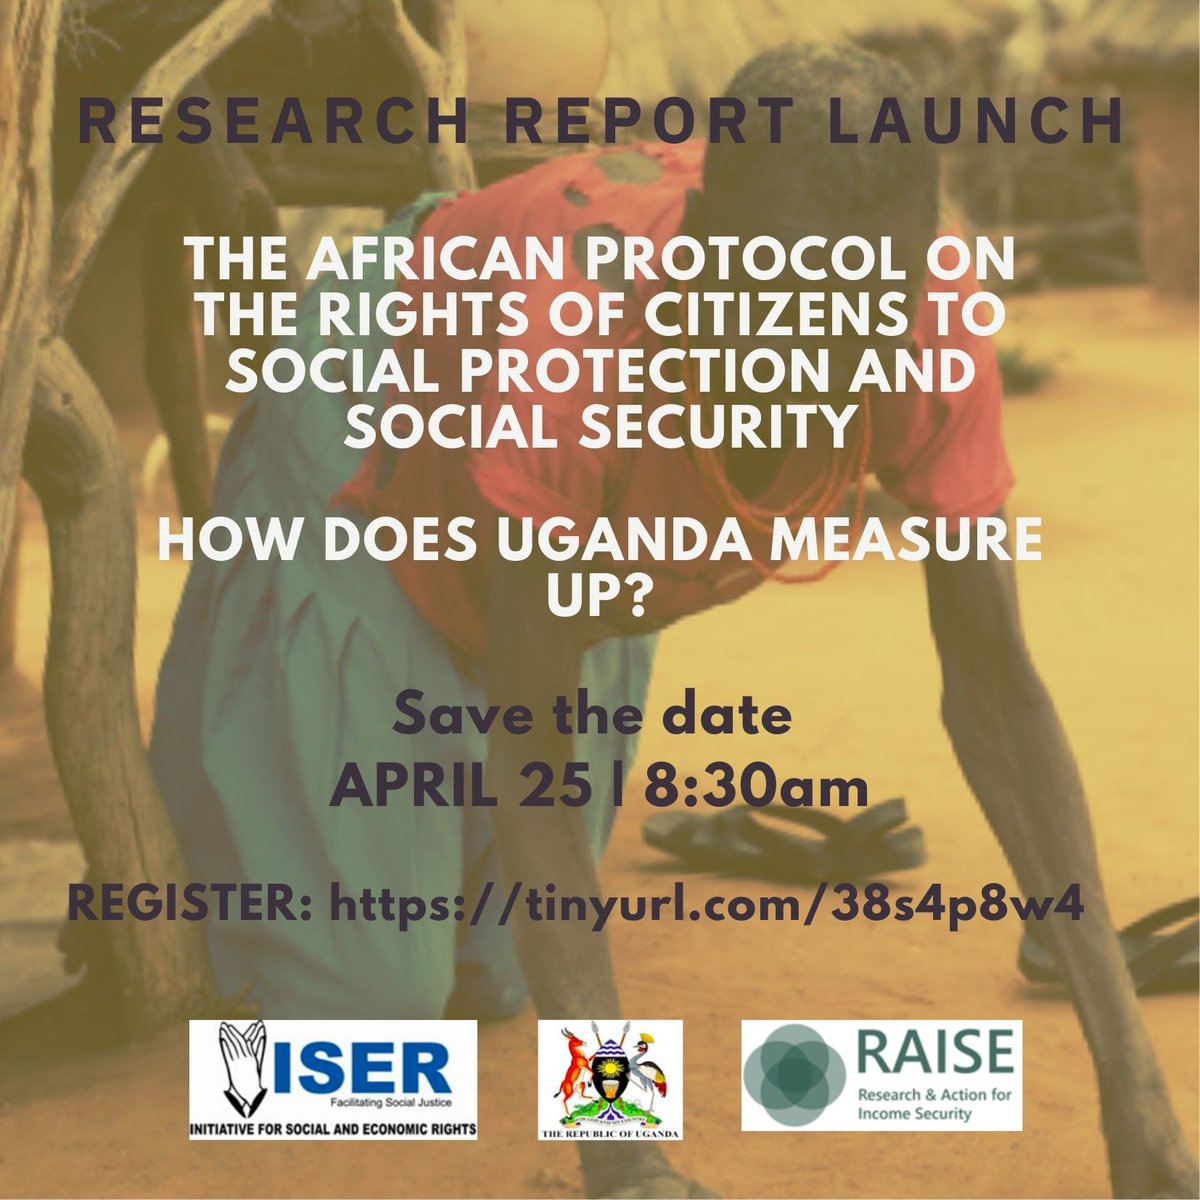 📌SAVE THE DATE! 25th April - ISER together with @Mglsd_UG & RAISE will launch a pivotal research titled 'The African Protocol on the Rights of Citizens to Social Protection and Social Security: How Does Uganda Measure Up?' RSVP now tinyurl.com/38s4p8w4 #SocialProtectionUg